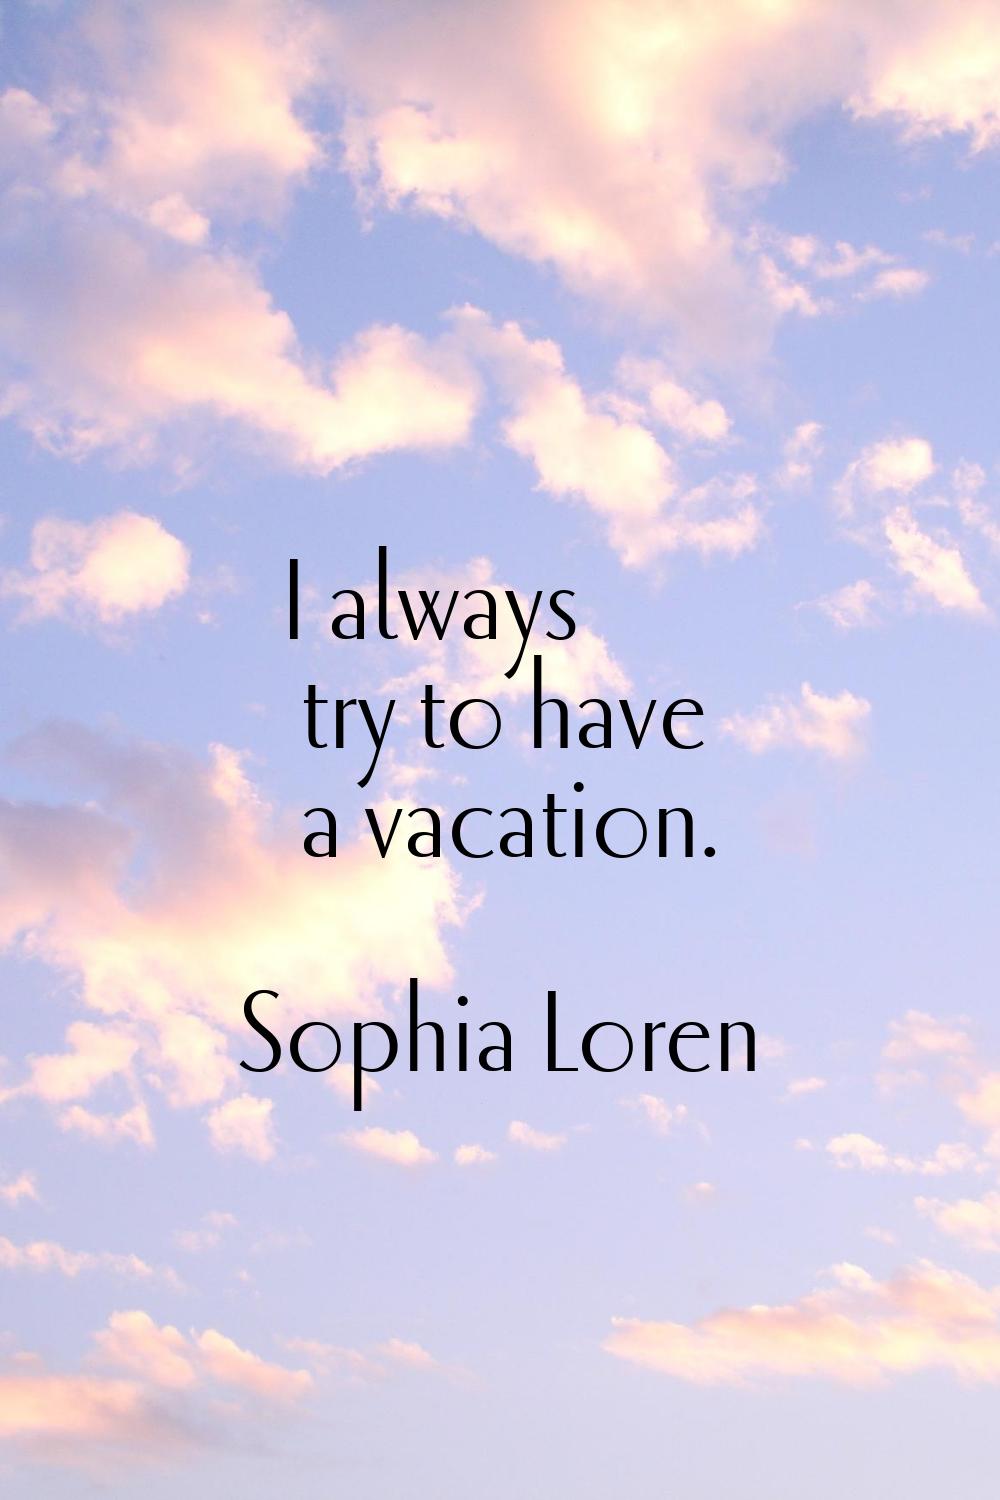 I always try to have a vacation.